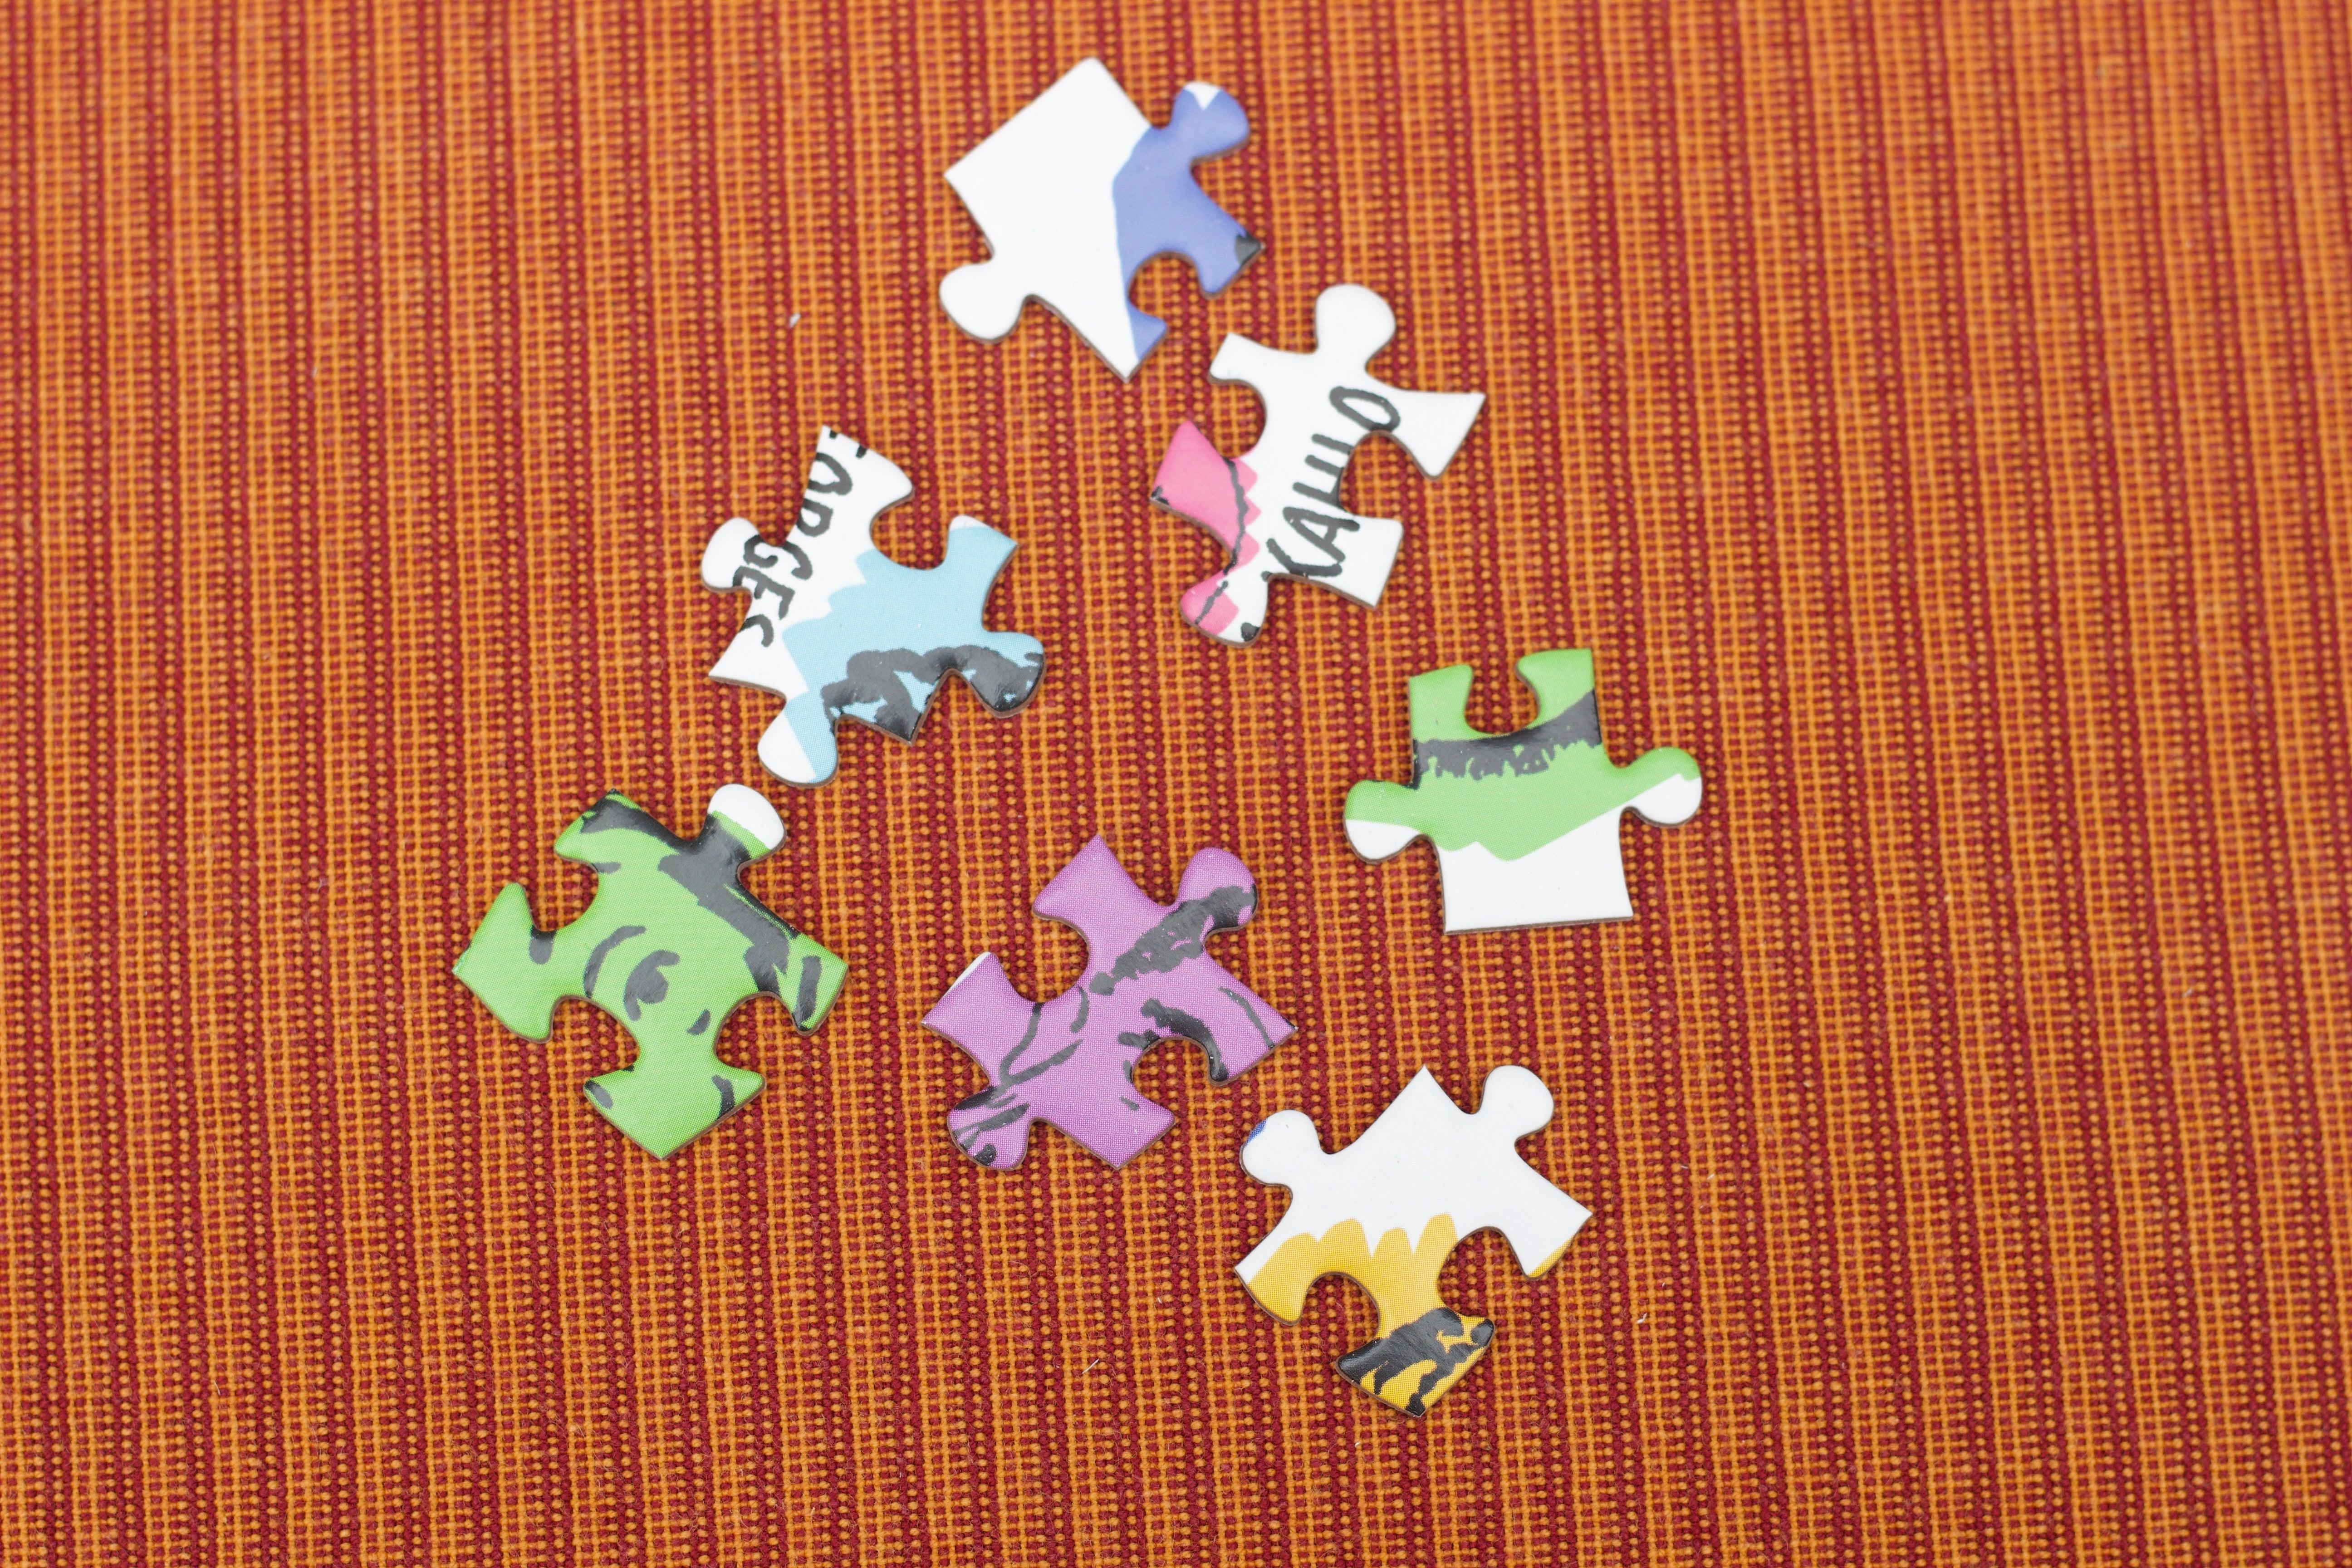 Product photo of Modern Artists Jigsaw Puzzle, a novelty gift manufactured by The Unemployed Philosophers Guild.